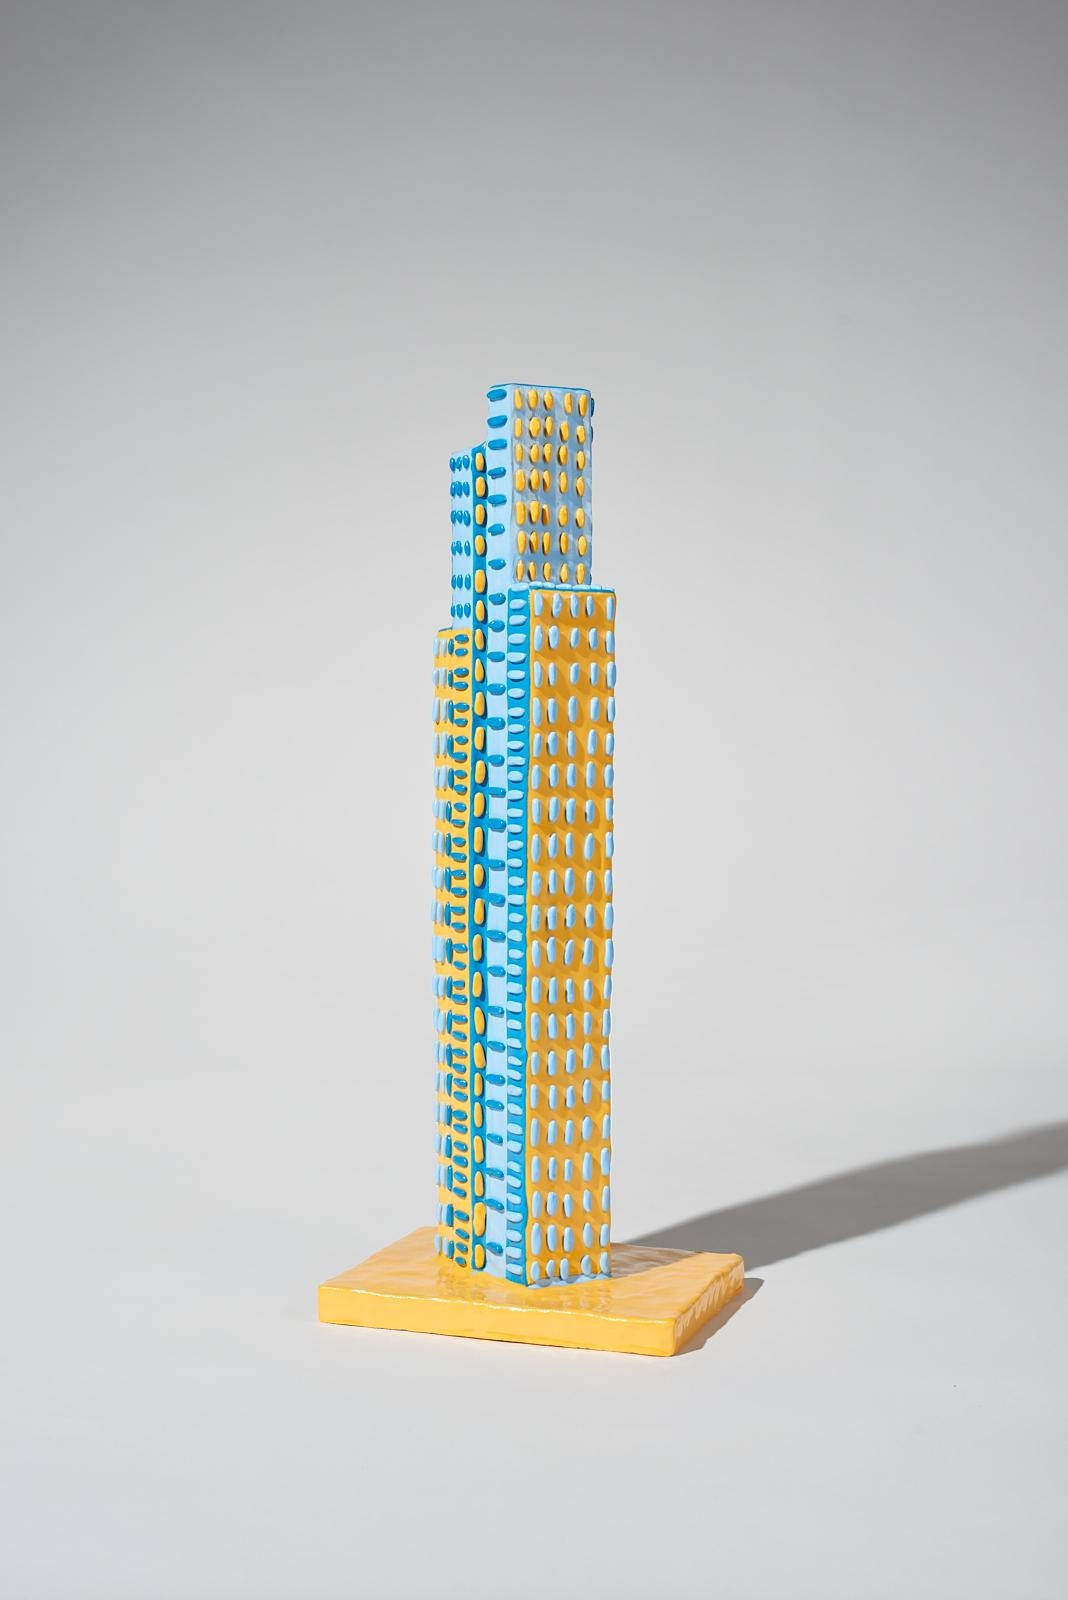 Glazed Decorative City Towers by Diego Faivre Minute Manufacture Designs For Sale